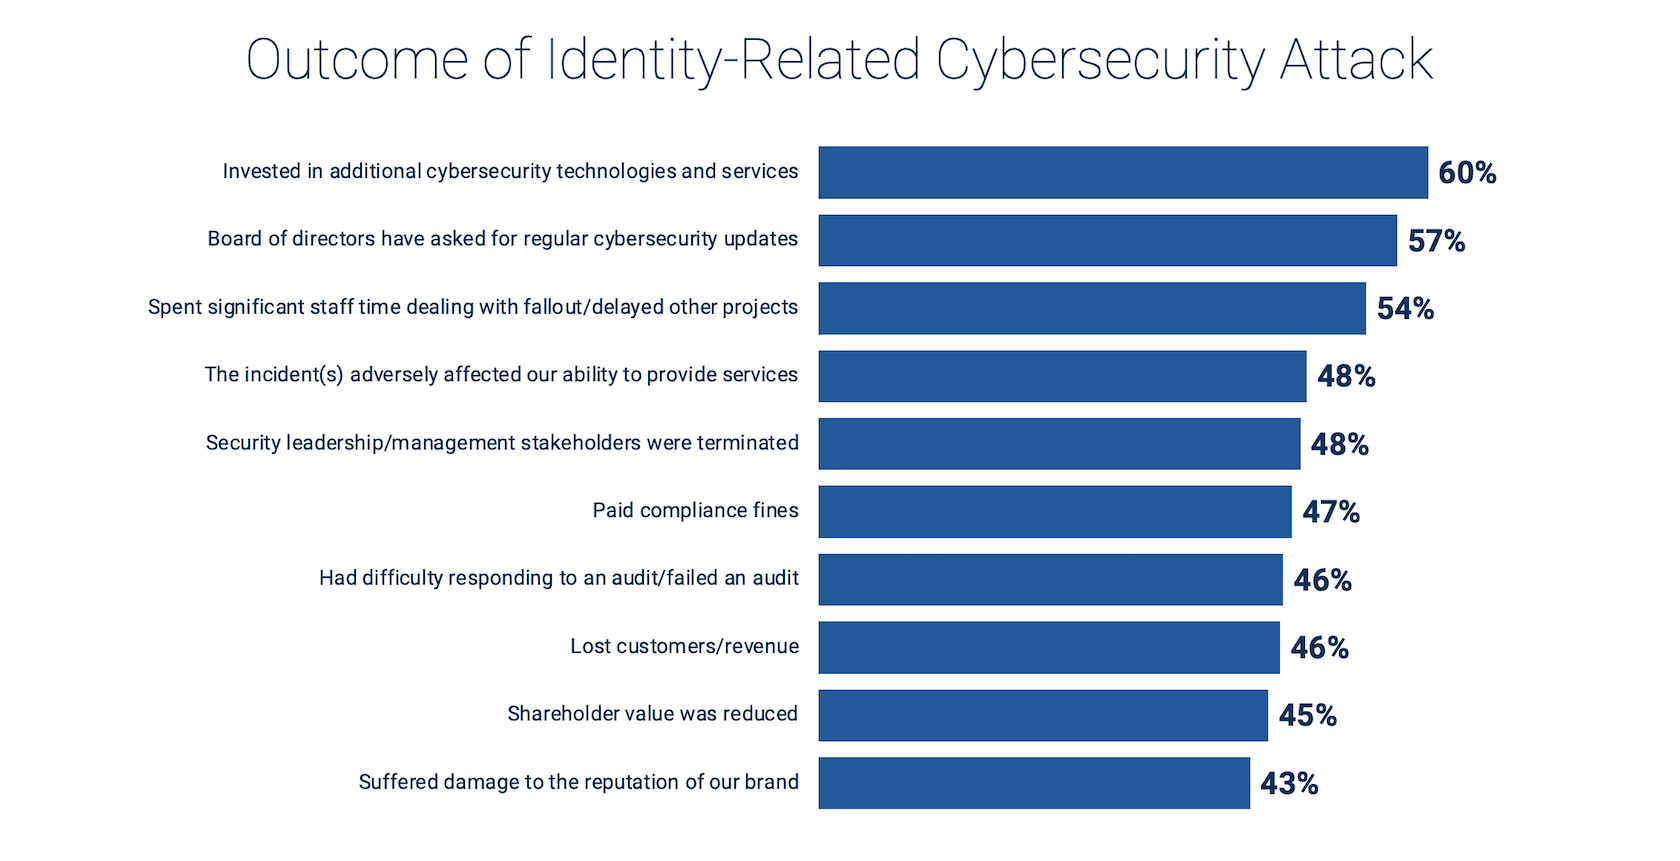 Outcome of identity-related cybersecurity attack